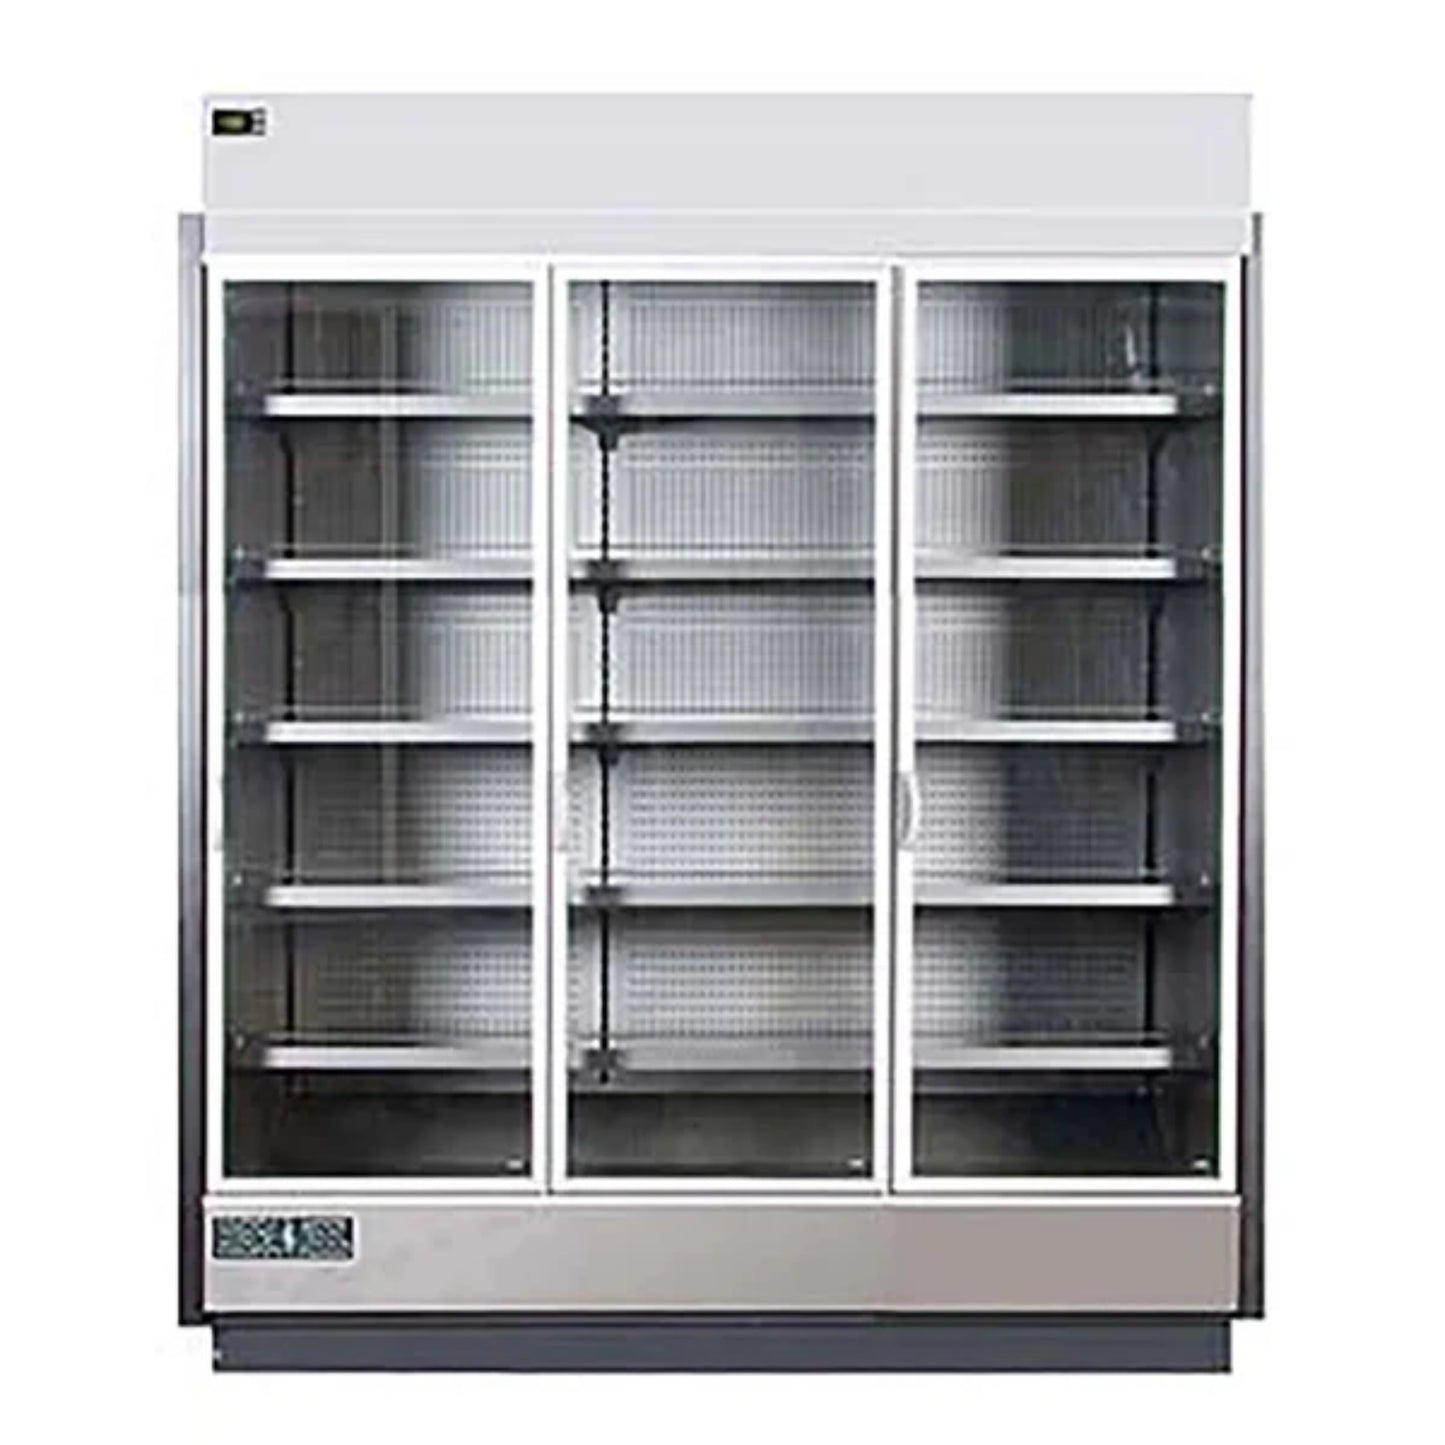 Hydra-Kool KGV-MD-3-S 3-Door High Volume Grab And Go Self-Contained